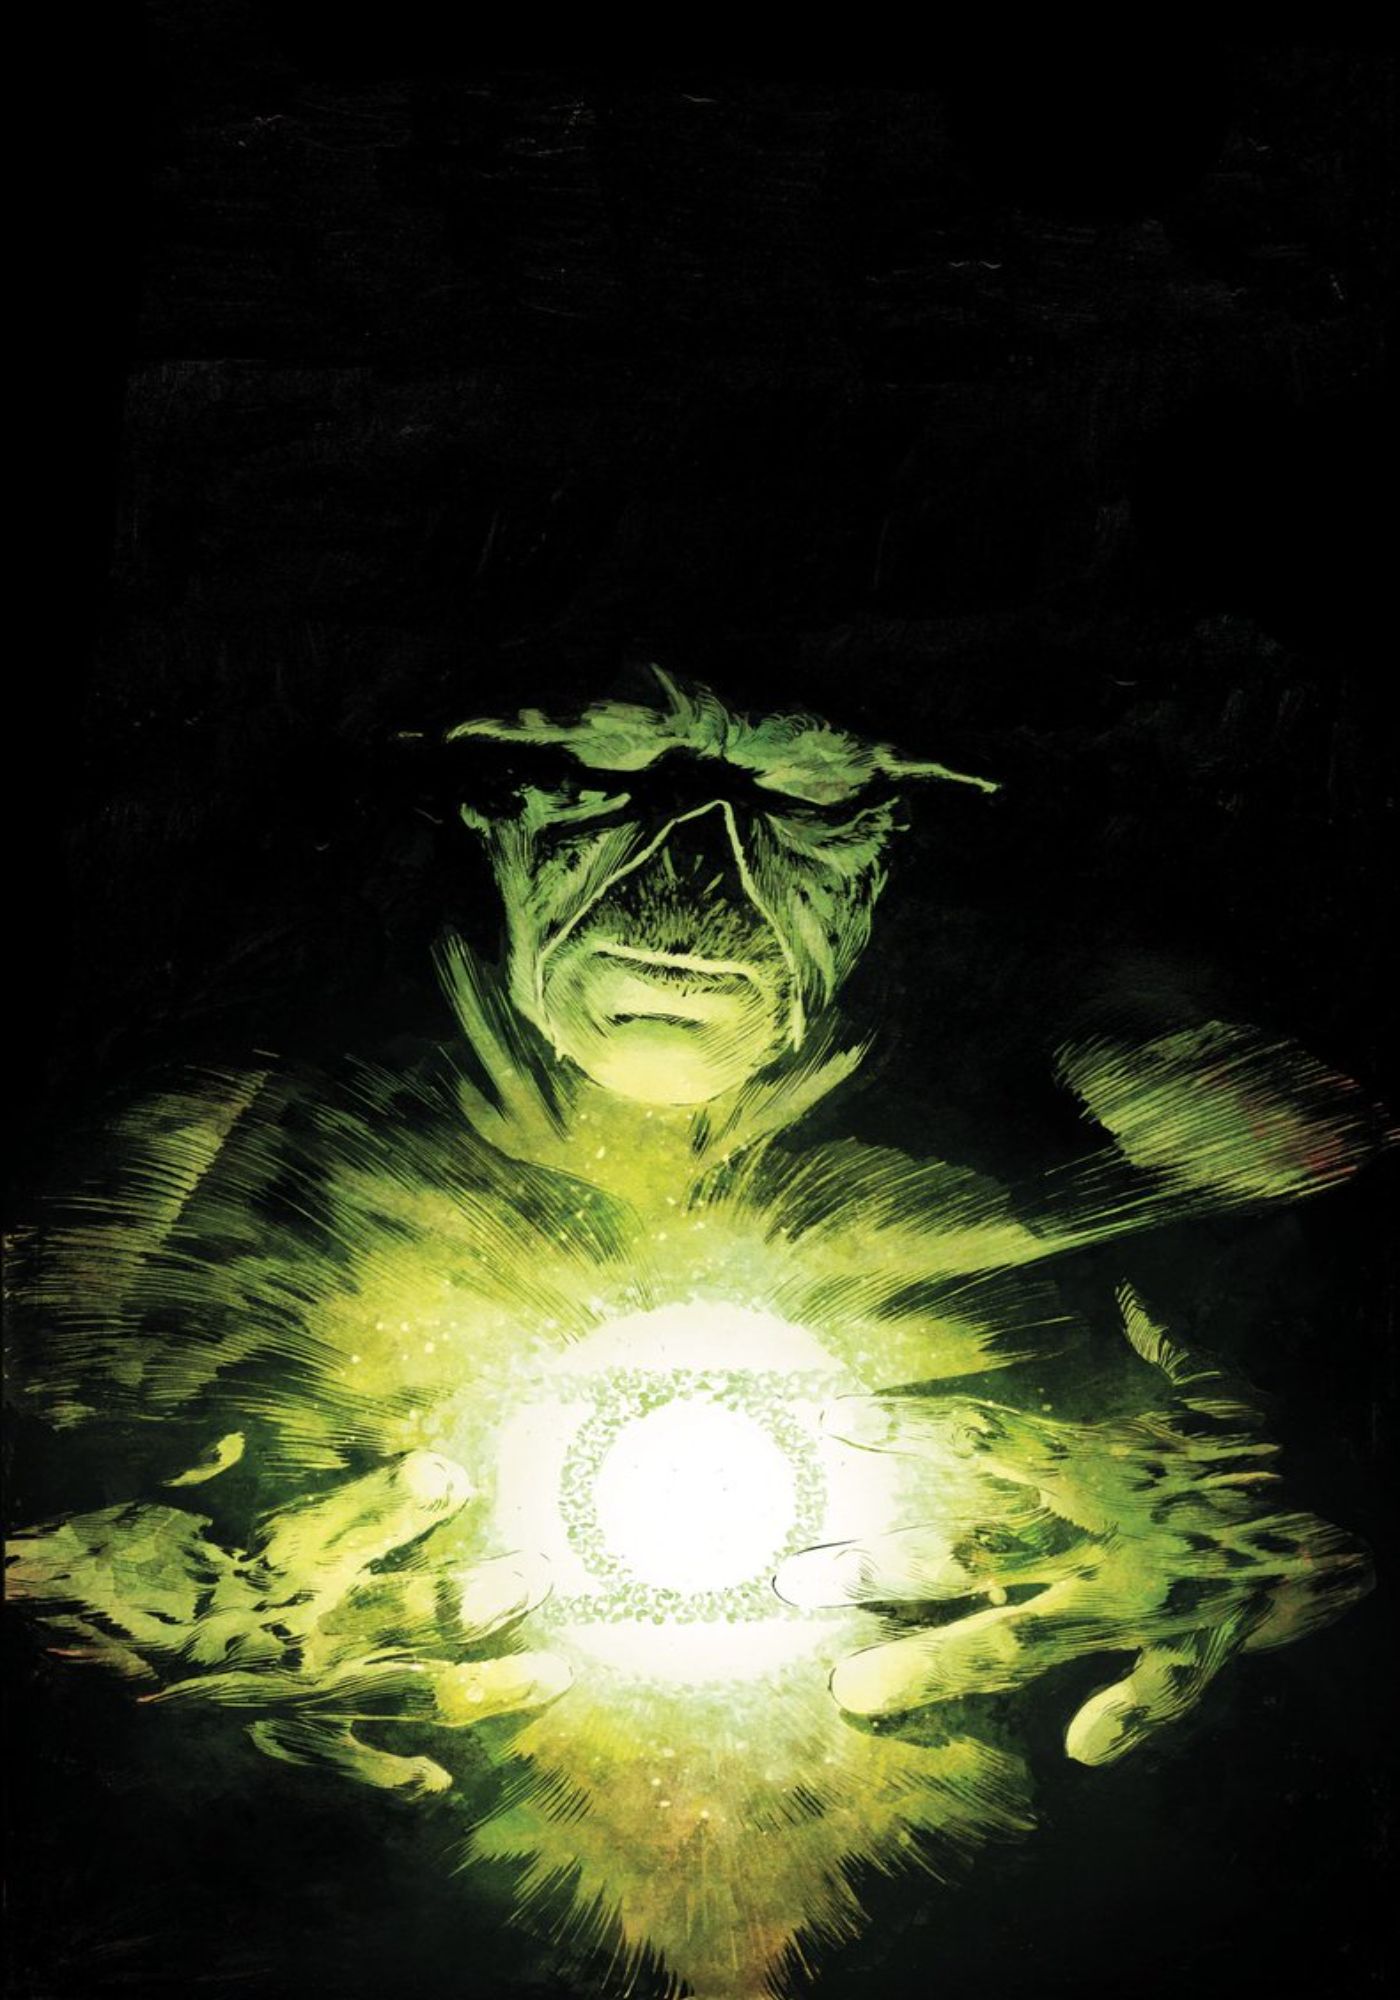 Swamp Thing Becomes The Ultimate GREEN Lantern In New DC Comics Art